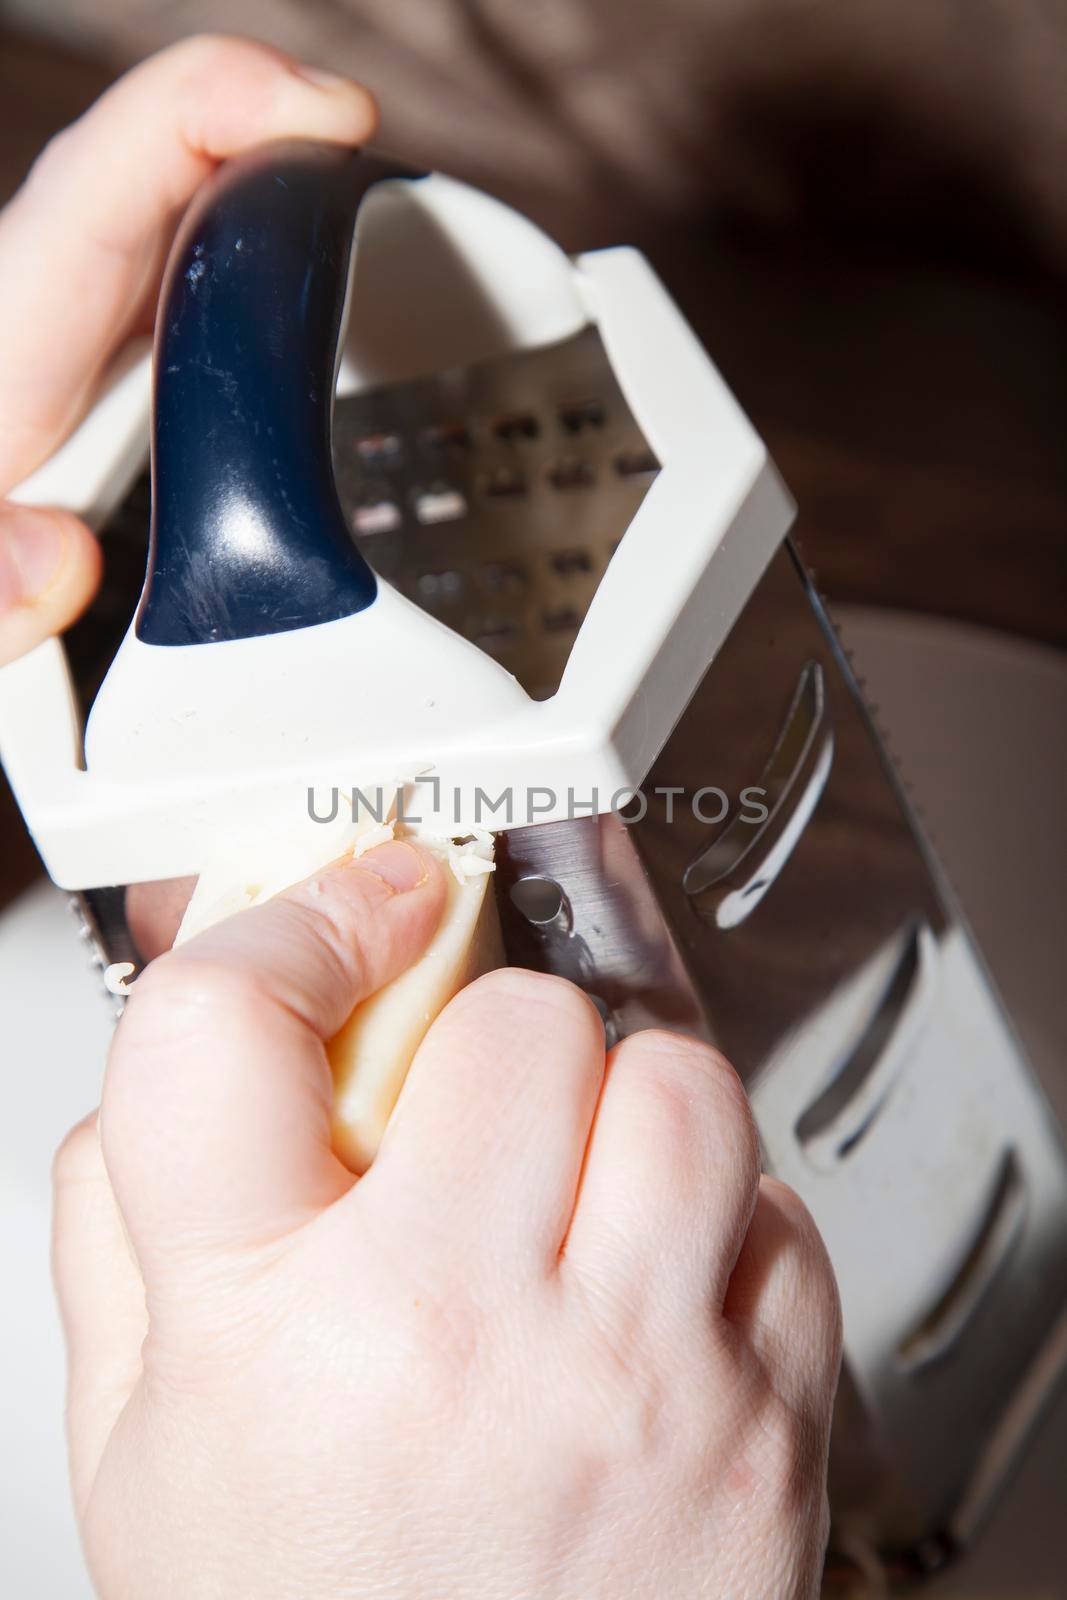 Woman using a large, metal cheese grater to shred white cheese on a white plate